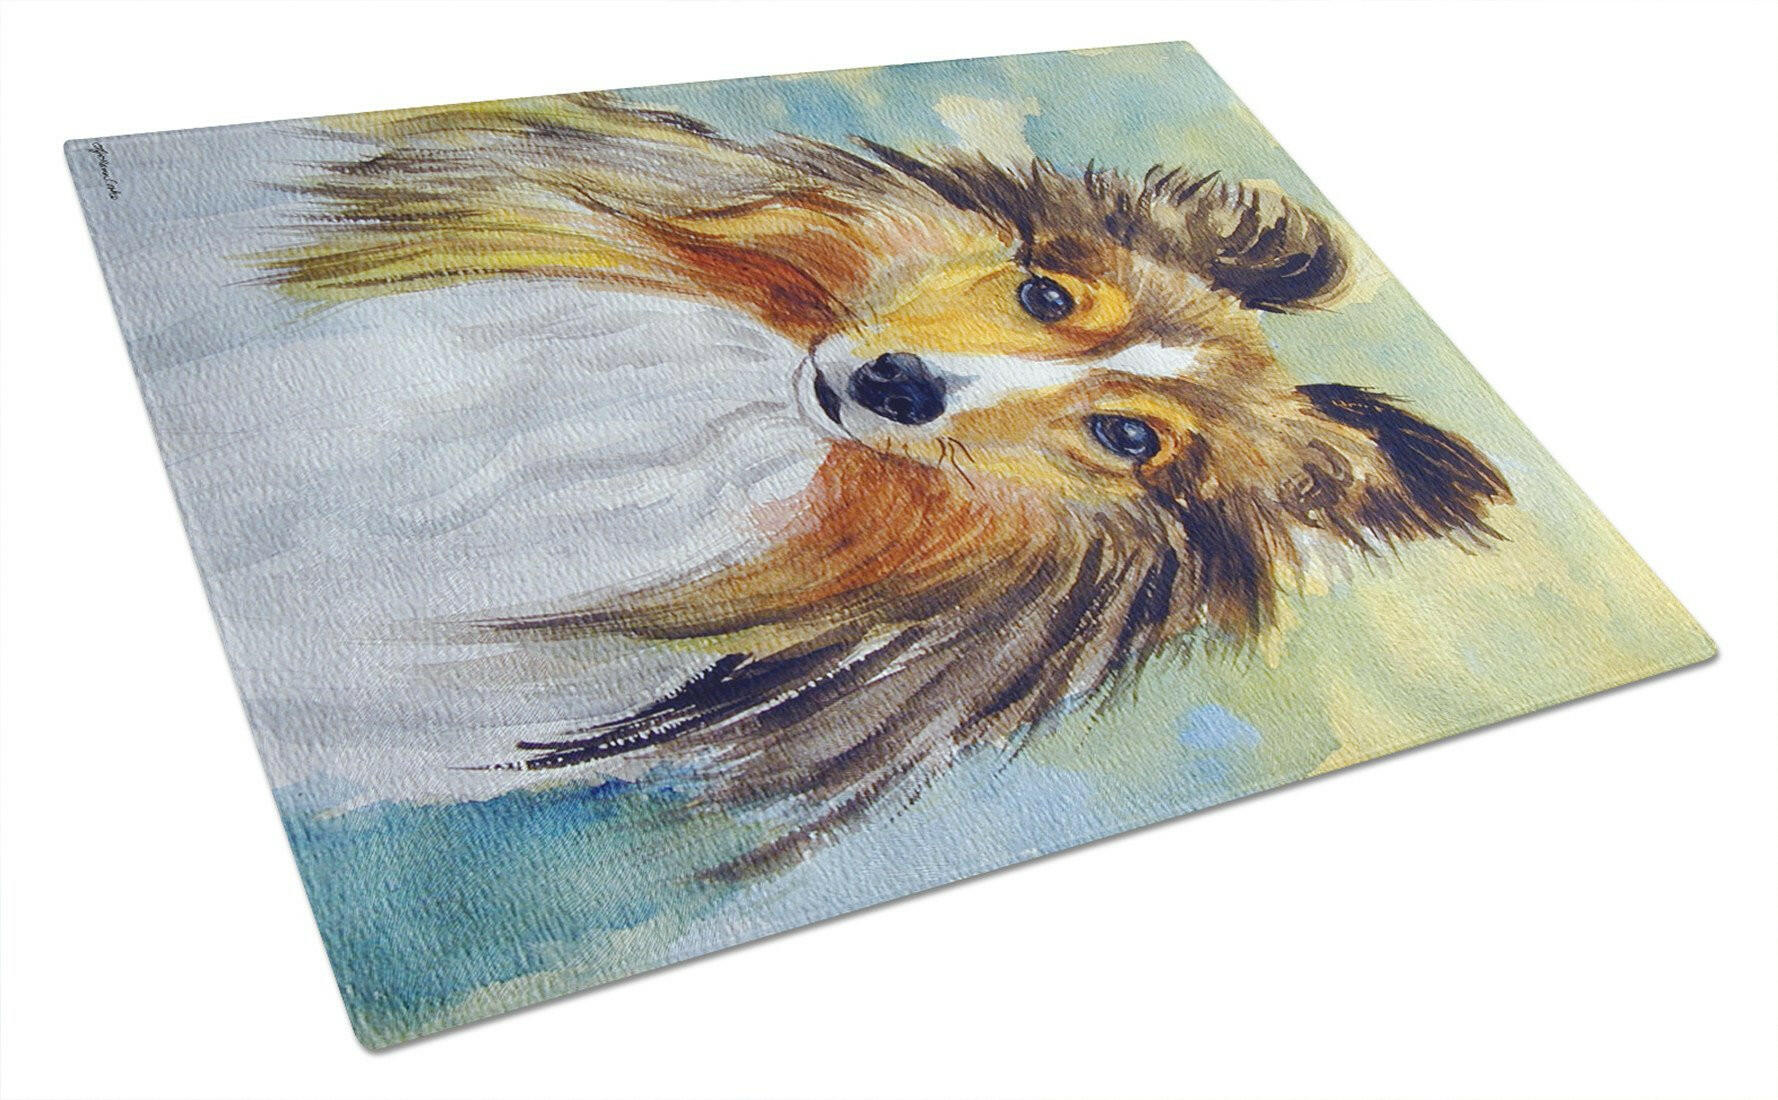 Sheltie Toby Glass Cutting Board Large 7397LCB by Caroline's Treasures